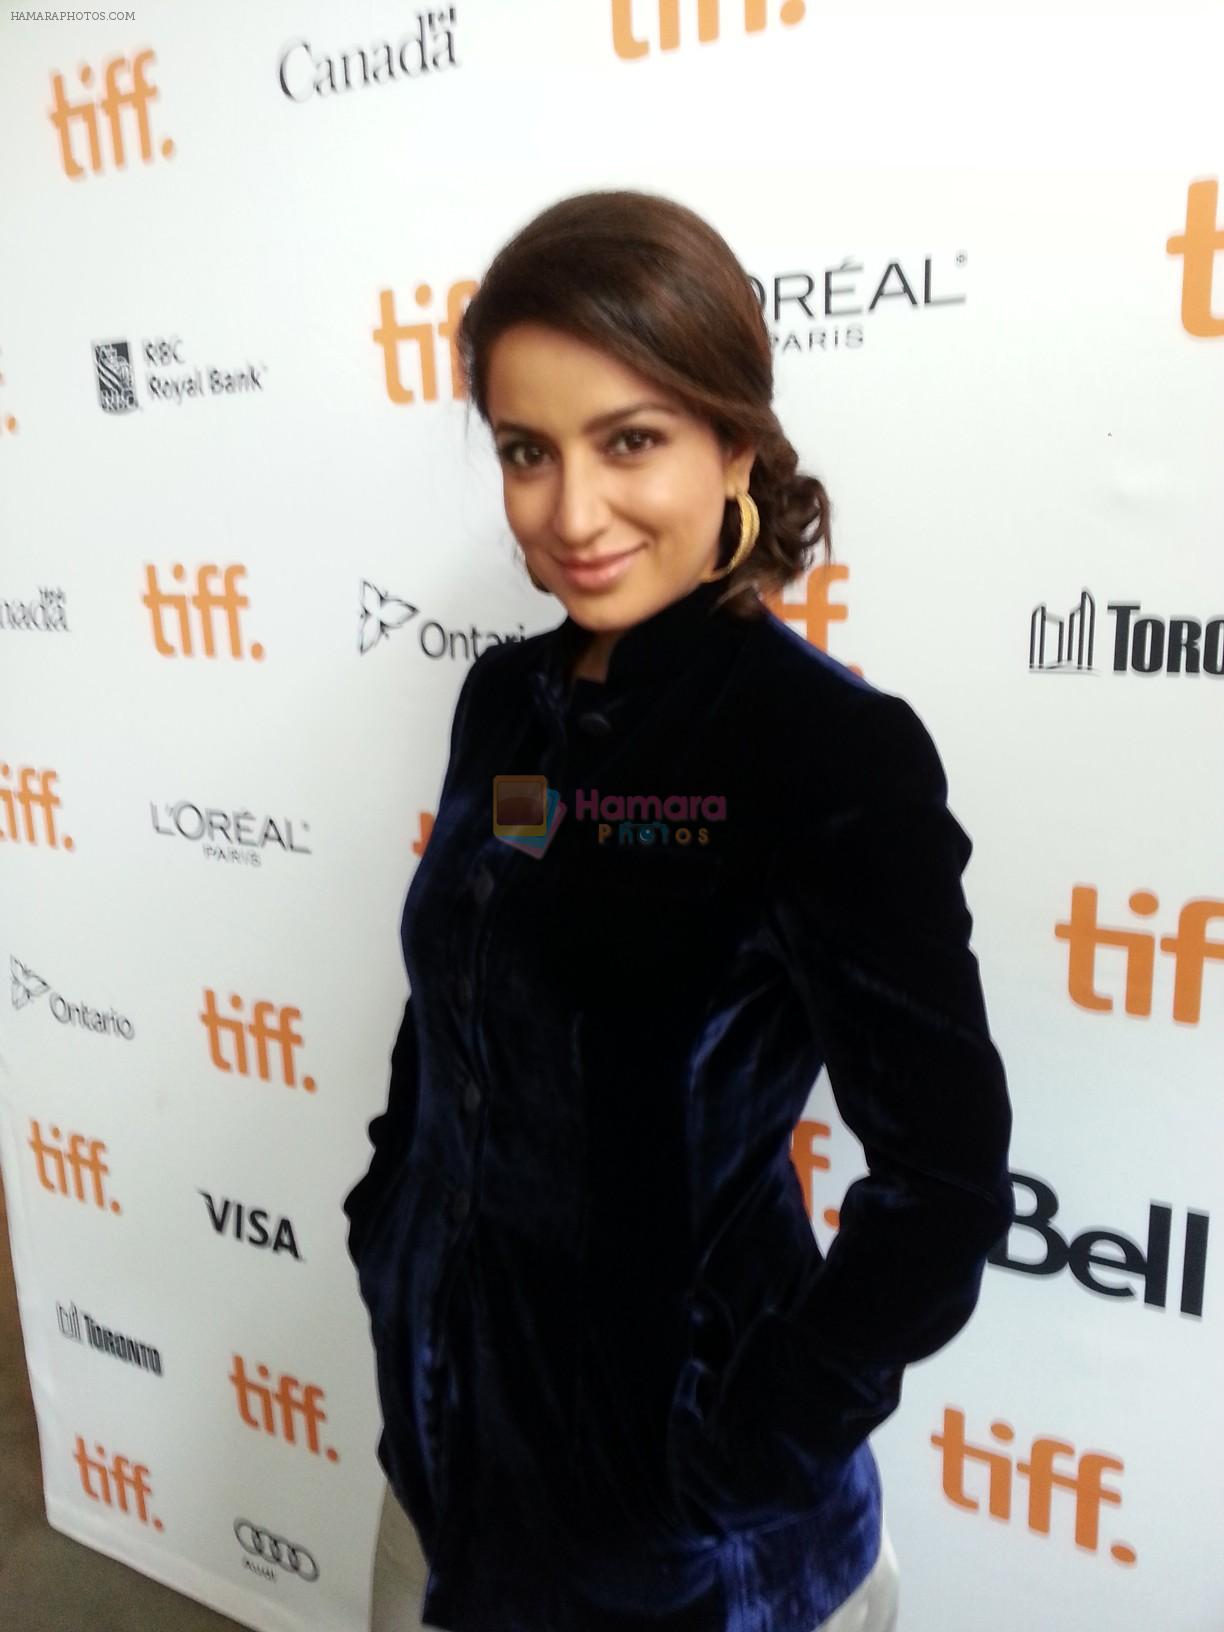 Tisca chopra at The 2nd Annual TIFF Event on 11th Sept 2013